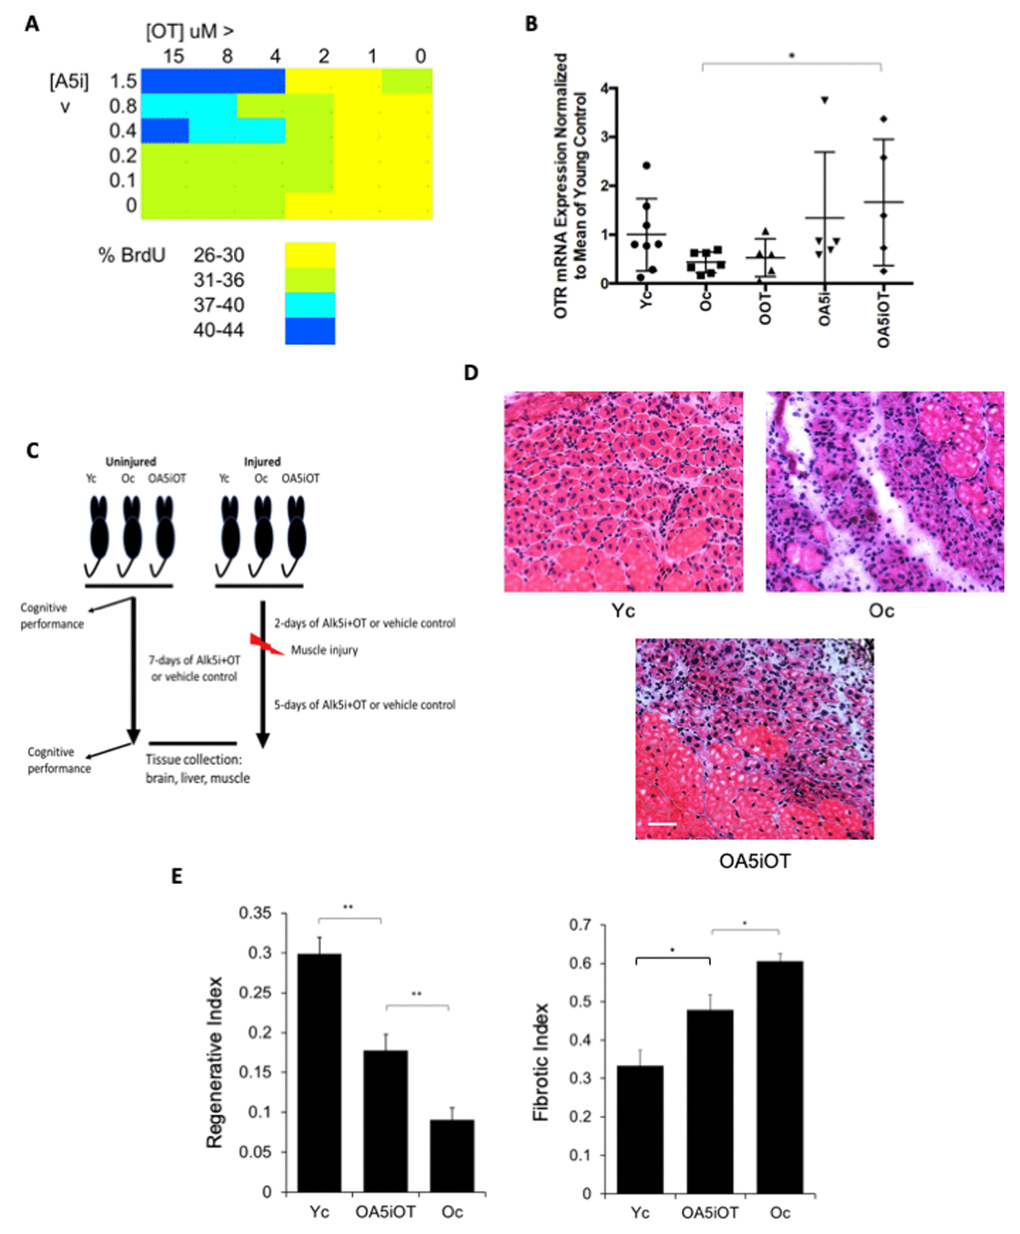 Effects of OT and Alk5i on myogenic proliferation, OTR expression and muscle repair in vivo. (A) Old muscle stem cells were freshly isolated from aged (23-24mo old) C57.B6 male mice and cultured in Opti-MEM with 5% old mouse serum. The indicated doses of Alk5i and OT (both micromolar) were added to 103 cells per well of 96 well plates for 24 hours. Cells were pulsed with BrdU, immunostained and counted. Shown is the percent proliferation visualized as a heat map. The effects of OT and Alk5i on proliferation are dose dependent and at some doses Alk5i+OT has a more robust effect than each molecule alone. (B) Old (23-24mo) C57.B6 mice were administered by subcutaneous injections with oxytocin (OOT), Alk5i (OA5i), a mixture of OT and Alk5i (OA5iOT) or HBSS (Oc) in vivo for 7 days, daily. Young (2-3mo) mice (Yc) were injected with HBSS in an identical manner. The expression levels of oxytocin receptor (OTR) were assayed by real-time qRT-PCR in the TA muscles of these mice and were normalized to Actin. OA5iOT as compared to Oc (*p = 0.030). N = 8 for Yc, N = 7 for Oc, N = 5 for OOT, N = 5 for OA5i, and N = 5 for OA5iOT. (C) Schematic of the experimental procedure. Old (23-24 month) C57.B6 mice were injected subcutaneously with Alk5i+OT (0.02 nmol/g/day for Alk5i, and 1 µg/g/day for OT) (OA5iOT) or control vehicle (HBSS) (Oc) for 7 days daily. The young C57.B6 mice (Yc, 3-4 month), were identically administered with HBSS for 7 days. After two days of Alk5i+OT or HBSS injections, some young and old mice underwent experimental muscle injury and were then treated with Alk5i+OT or HBSS for 5 days; while other mice were analyzed in the absence of tissue injury. Male mice were used in these studies. (D) TA muscles were injured by injections of CTX and 5 days later, muscles were snap-frozen in OCT and cryosectioned to 10 µm. H&E staining was performed where newly formed muscle fibers are smaller and with central nuclei. These nascent myofibers form efficiently in the young, but not old injured muscles. As shown in representative H&E panels, Alk5i+OT dramatically enhanced in vivo myogenesis (dense areas of new myofibers) and diminished fibrosis (white areas devoid of muscle fibers). Scale bar=50 µm. (E) The regenerative index and fibrotic indices were defined at 5 days post CTX injury, as in (Rebo J., et al 2016); Alk5i+OT improved muscle regeneration and reduced fibrosis (*p=0.02201, **p Oc & OA5iOT = 0.0029, **p Yc & OA5iOT = 0.00870). N=5 for each cohort in both regenerative and fibrotic studies.